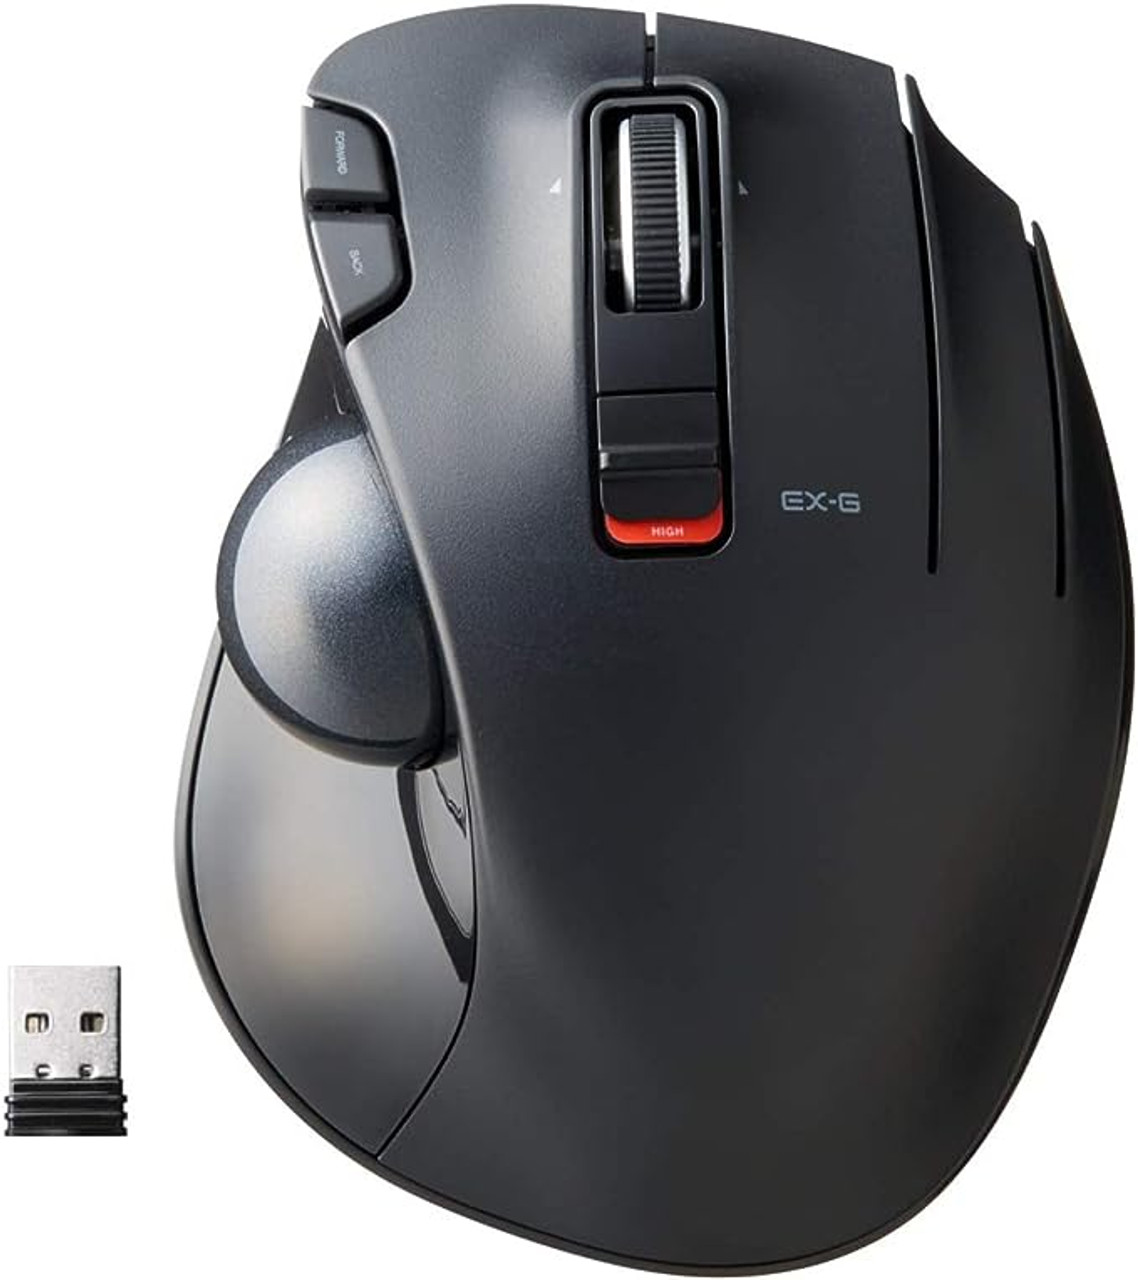 https://cdn11.bigcommerce.com/s-r4tr0/images/stencil/1280x1280/products/264743/437830/Wireless_Trackball_Mouse__29759.1692214036.jpg?c=2